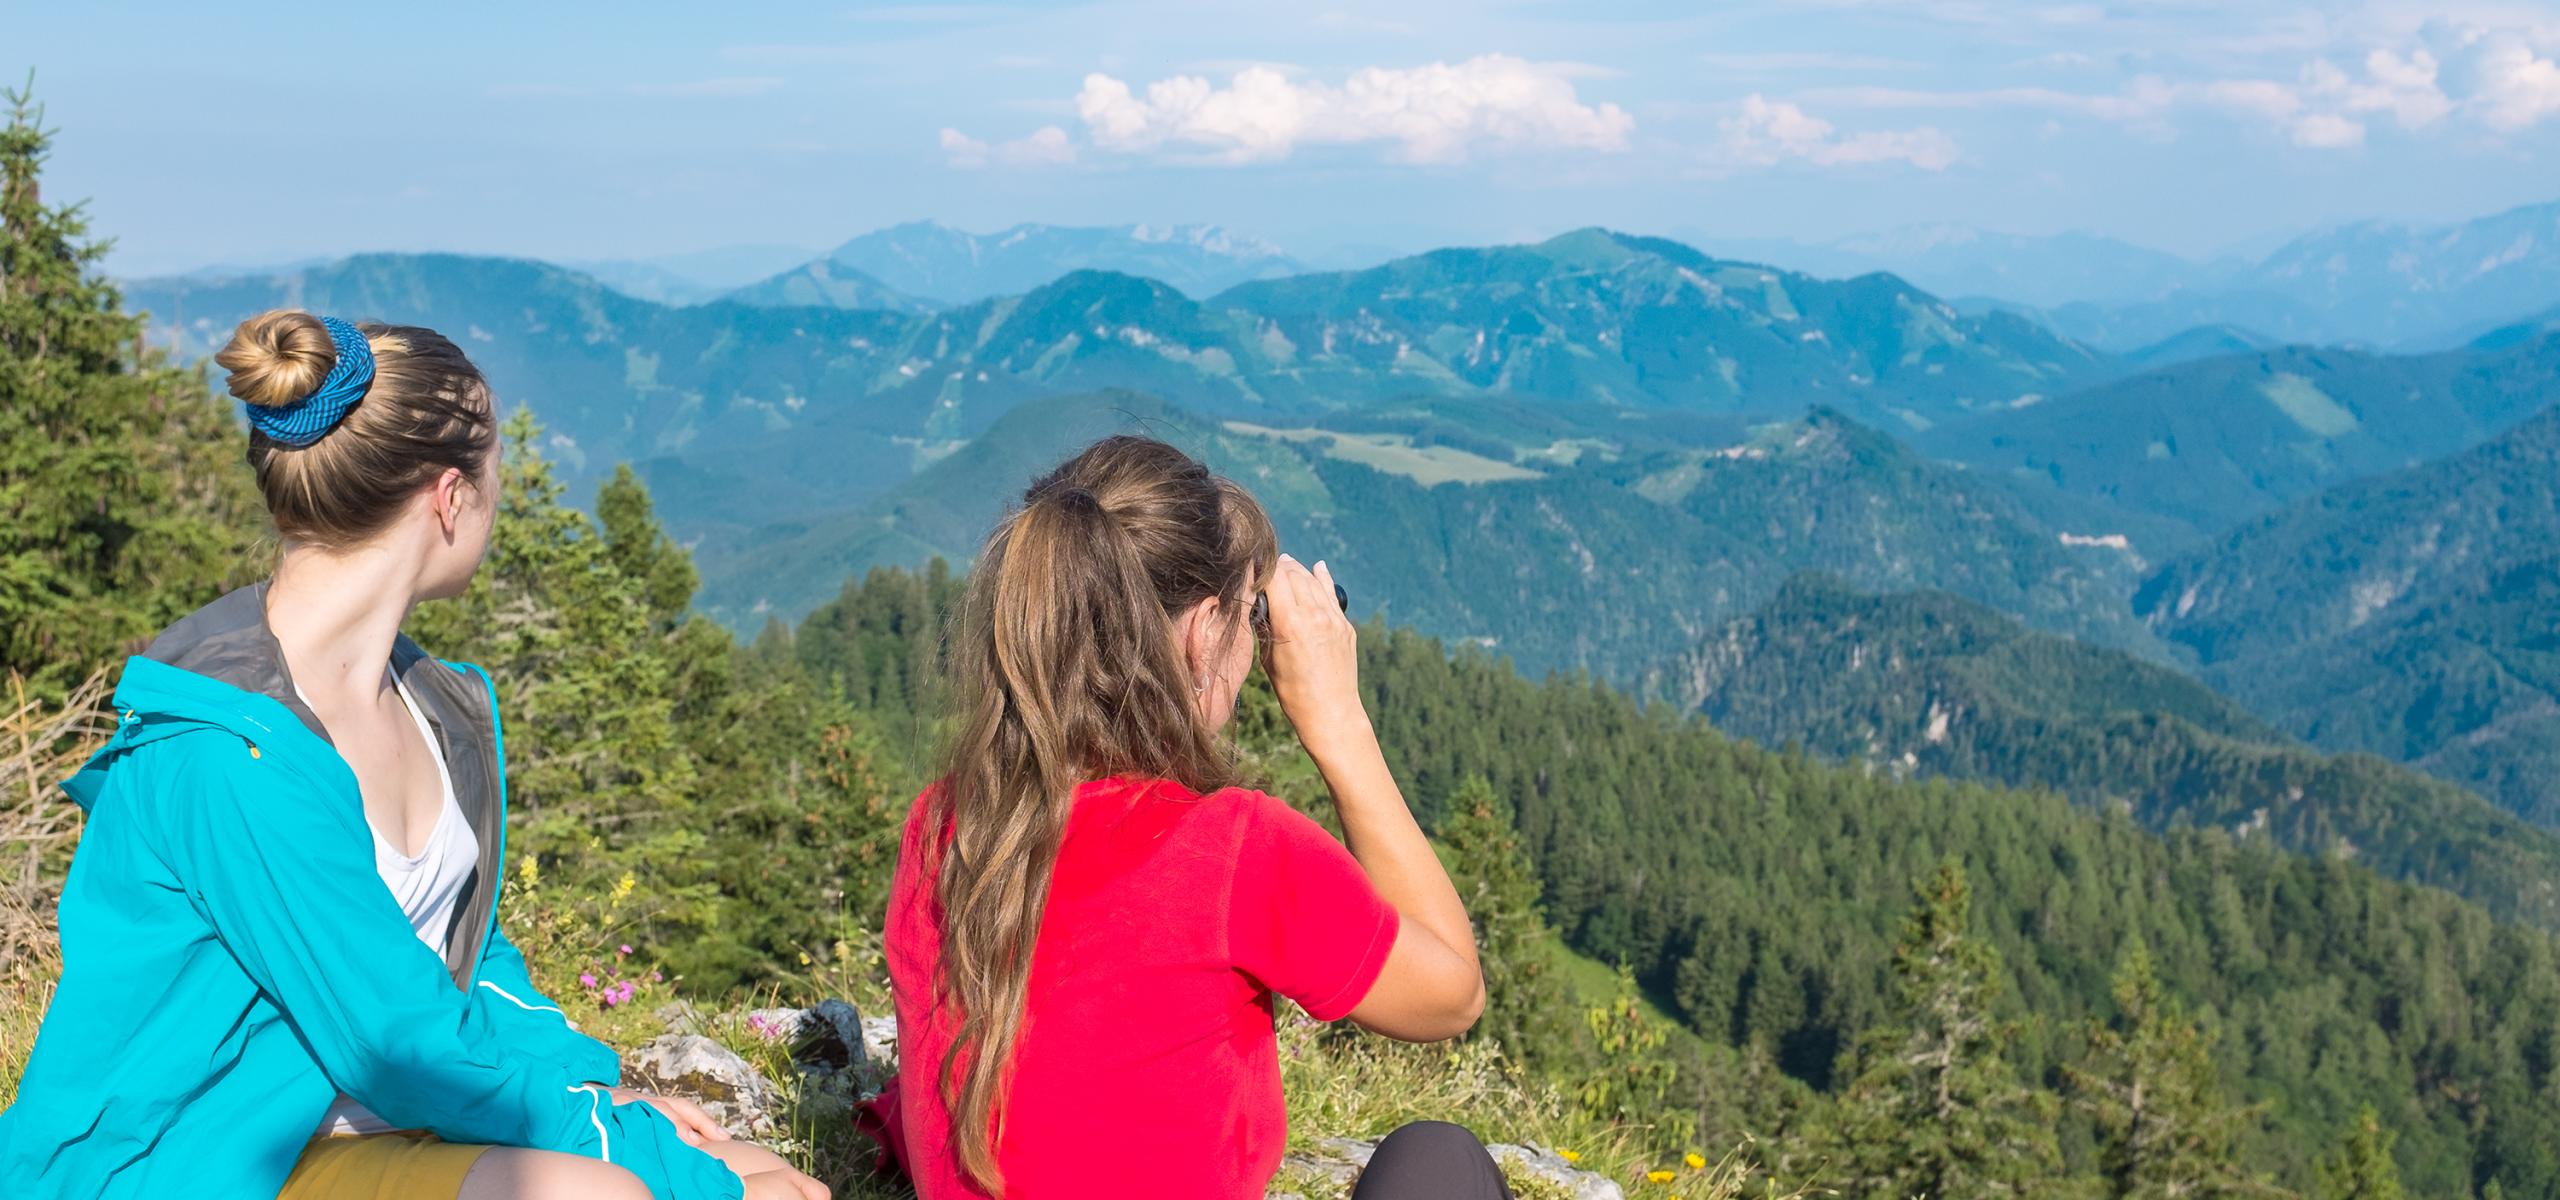 Two women sit on a mountain top and look over the mountain panorama